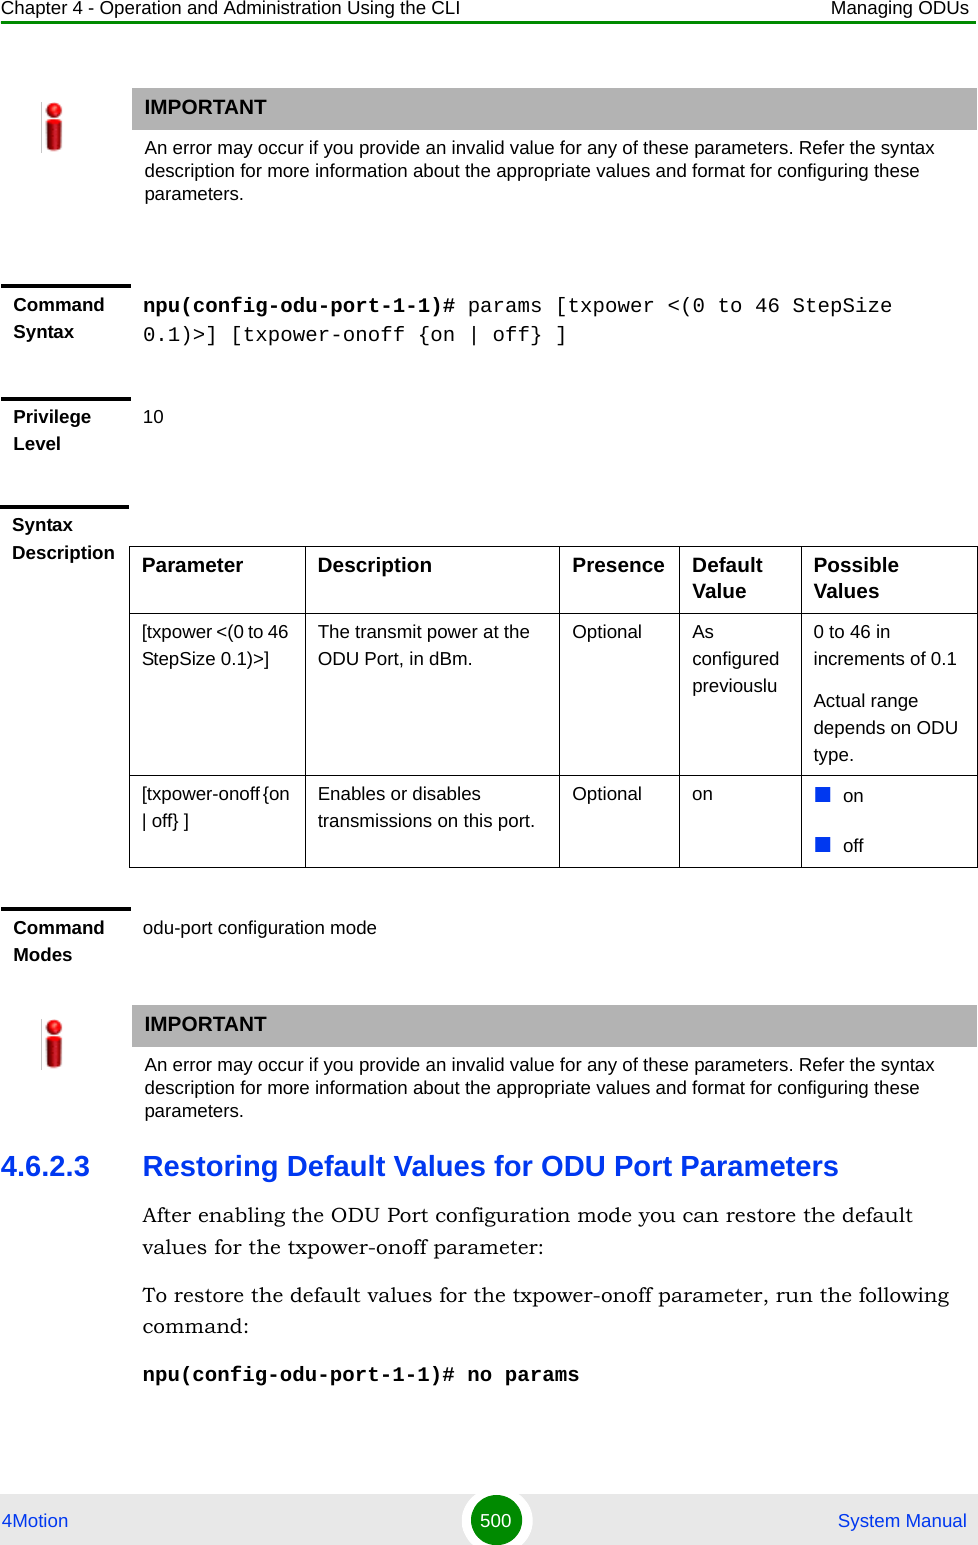 Chapter 4 - Operation and Administration Using the CLI Managing ODUs4Motion 500  System Manual4.6.2.3 Restoring Default Values for ODU Port ParametersAfter enabling the ODU Port configuration mode you can restore the default values for the txpower-onoff parameter:To restore the default values for the txpower-onoff parameter, run the following command:npu(config-odu-port-1-1)# no paramsIMPORTANTAn error may occur if you provide an invalid value for any of these parameters. Refer the syntax description for more information about the appropriate values and format for configuring these parameters.Command Syntaxnpu(config-odu-port-1-1)# params [txpower &lt;(0 to 46 StepSize 0.1)&gt;] [txpower-onoff {on | off} ]Privilege Level10Syntax Description Parameter Description Presence Default Value Possible Values[txpower &lt;(0 to 46 StepSize 0.1)&gt;]The transmit power at the ODU Port, in dBm. Optional As configured previouslu0 to 46 in increments of 0.1Actual range depends on ODU type.[txpower-onoff {on | off} ]Enables or disables transmissions on this port. Optional on onoffCommand Modesodu-port configuration modeIMPORTANTAn error may occur if you provide an invalid value for any of these parameters. Refer the syntax description for more information about the appropriate values and format for configuring these parameters.